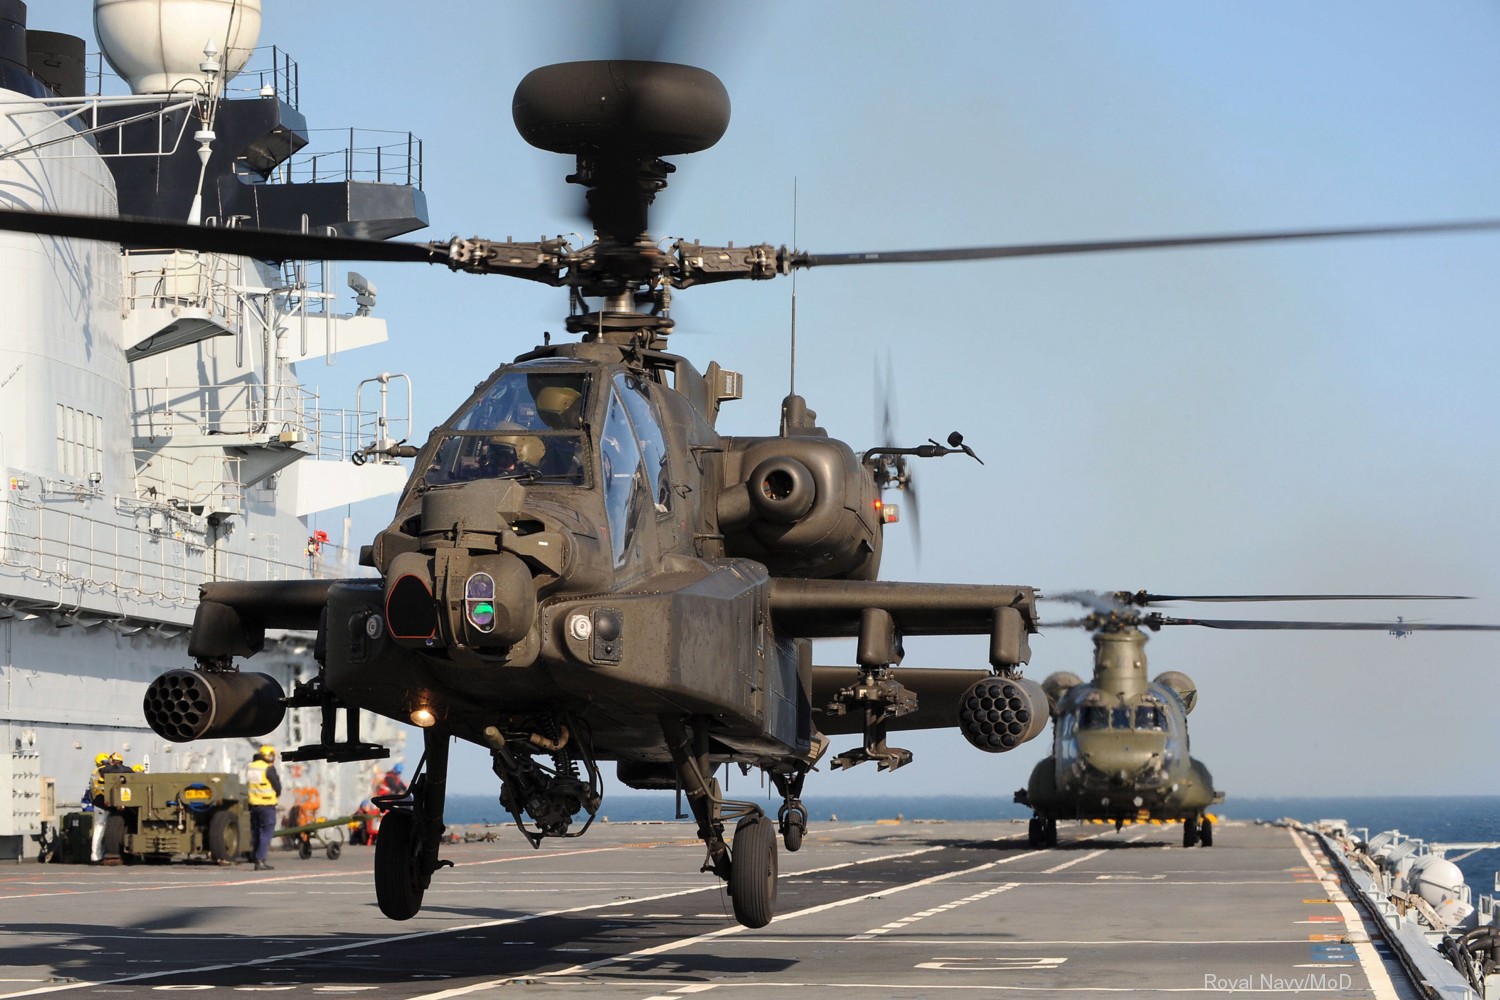 r06 hms illustrious invincible class aircraft carrier royal navy 15 apache helicopter